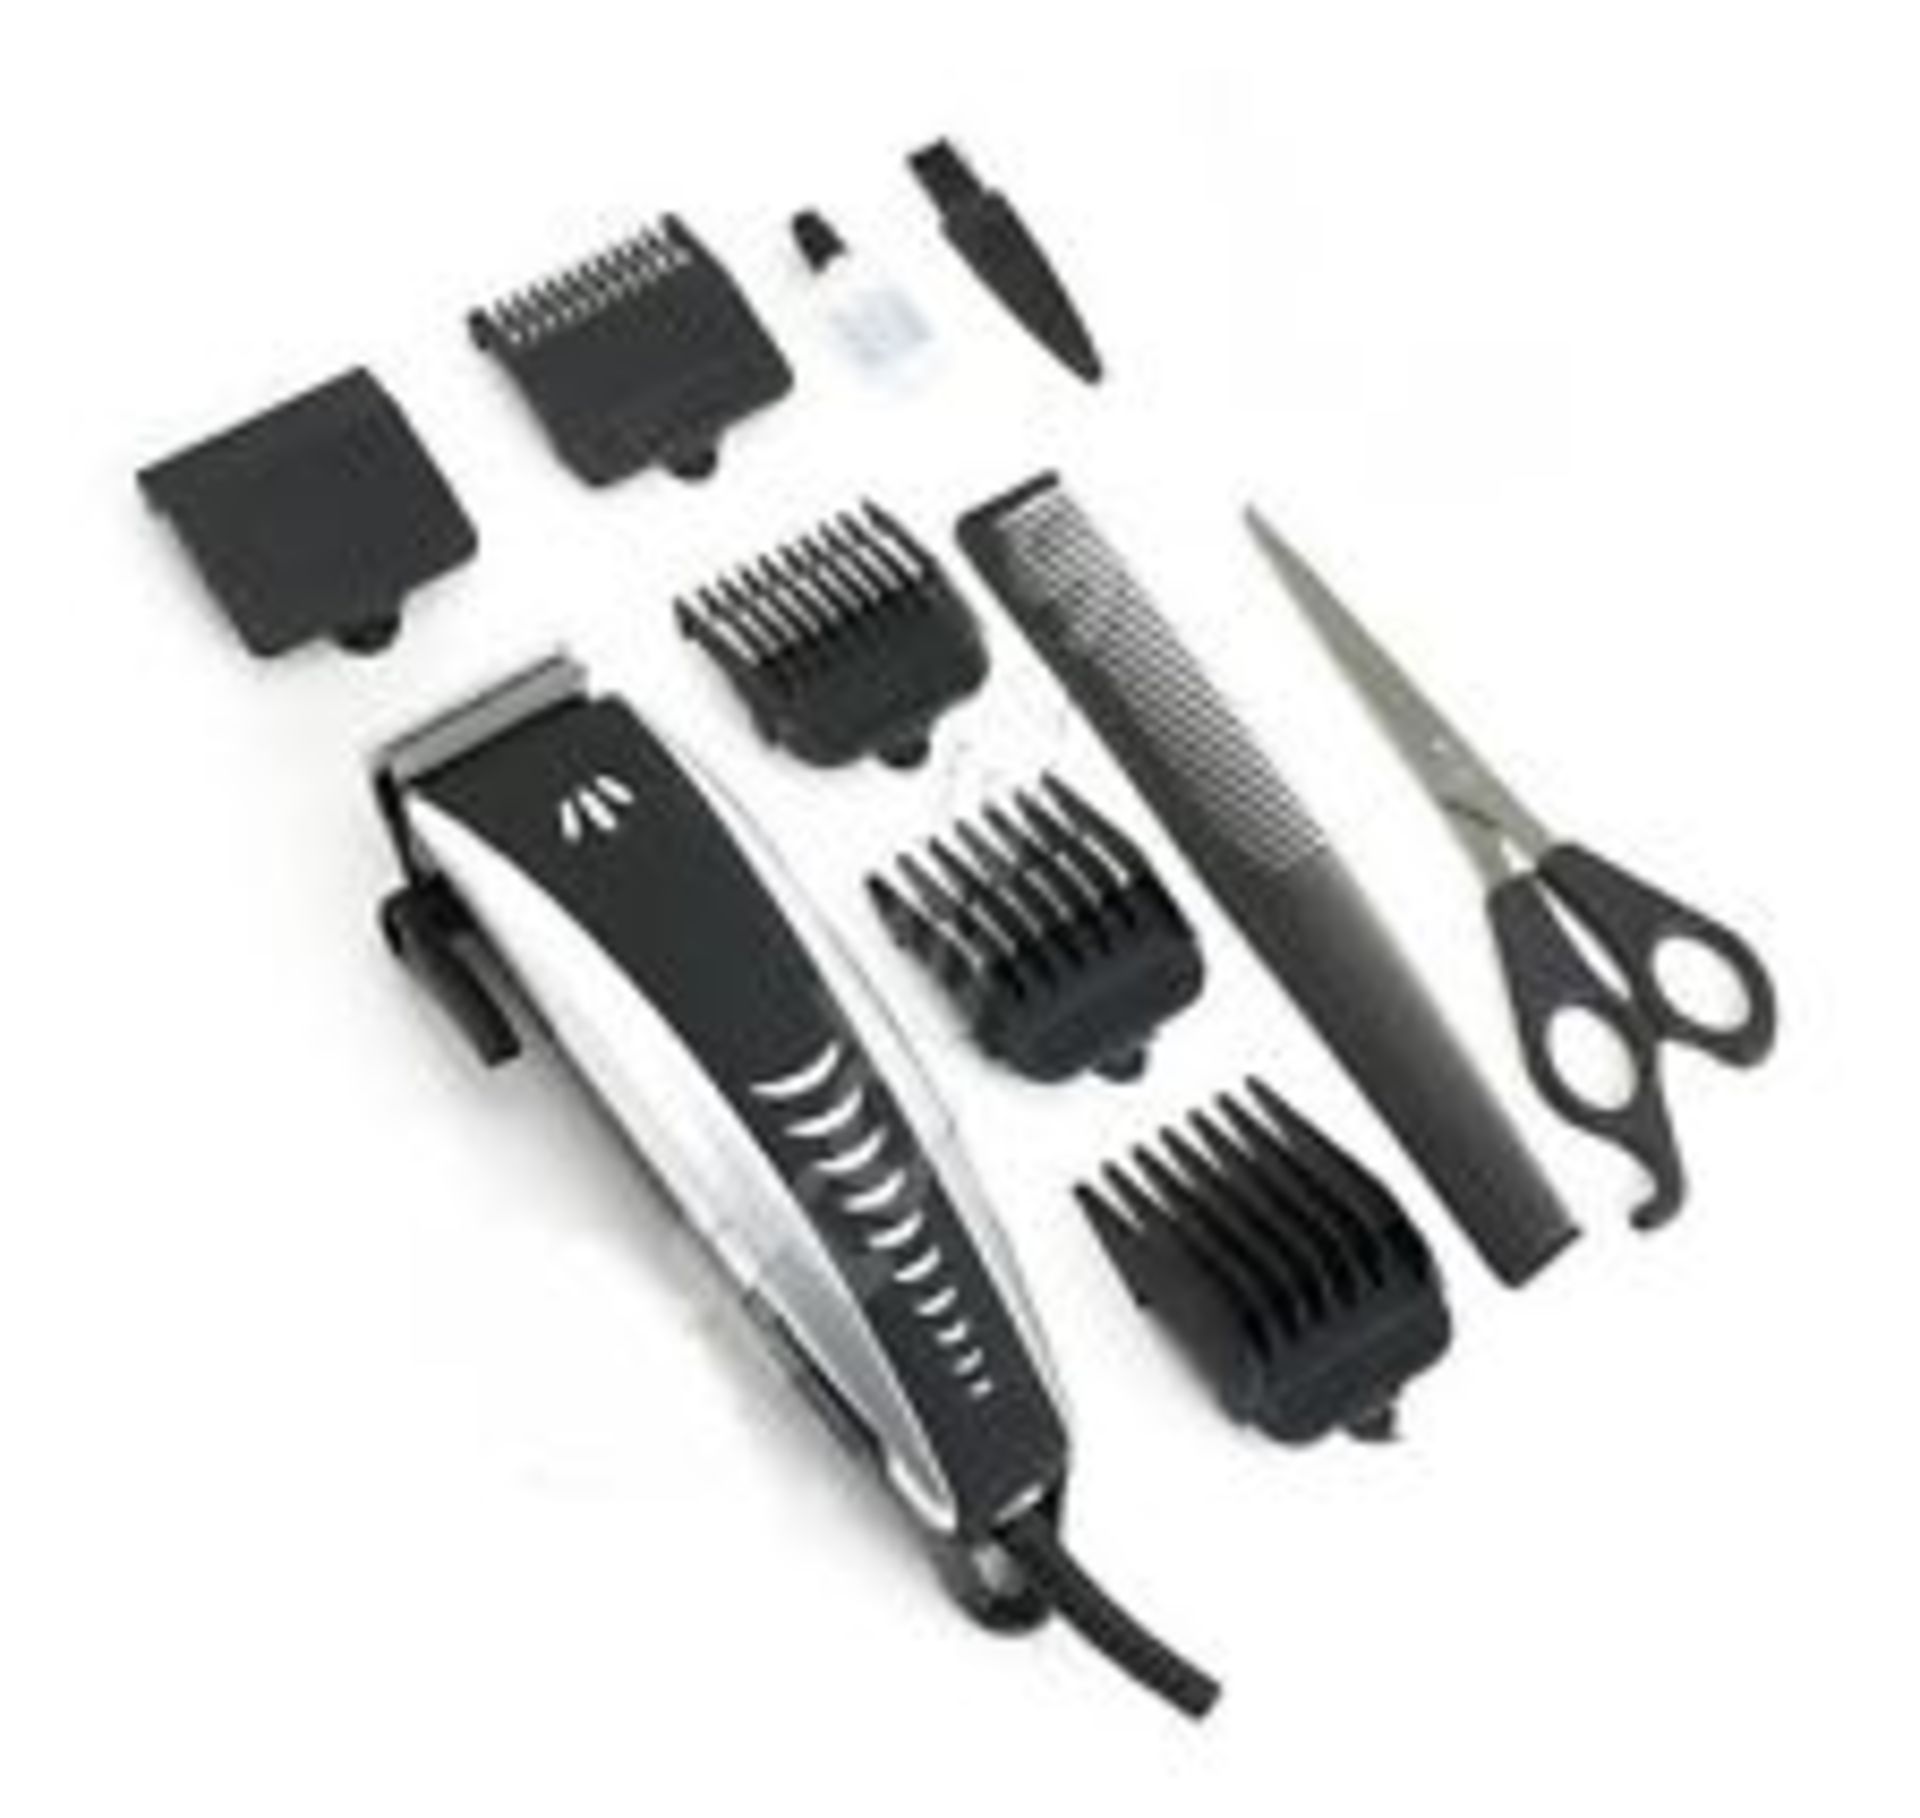 V *TRADE QTY* Brand New Professional Hair Clipper set 8in1 Accessories including 4 Melal Plastic Att